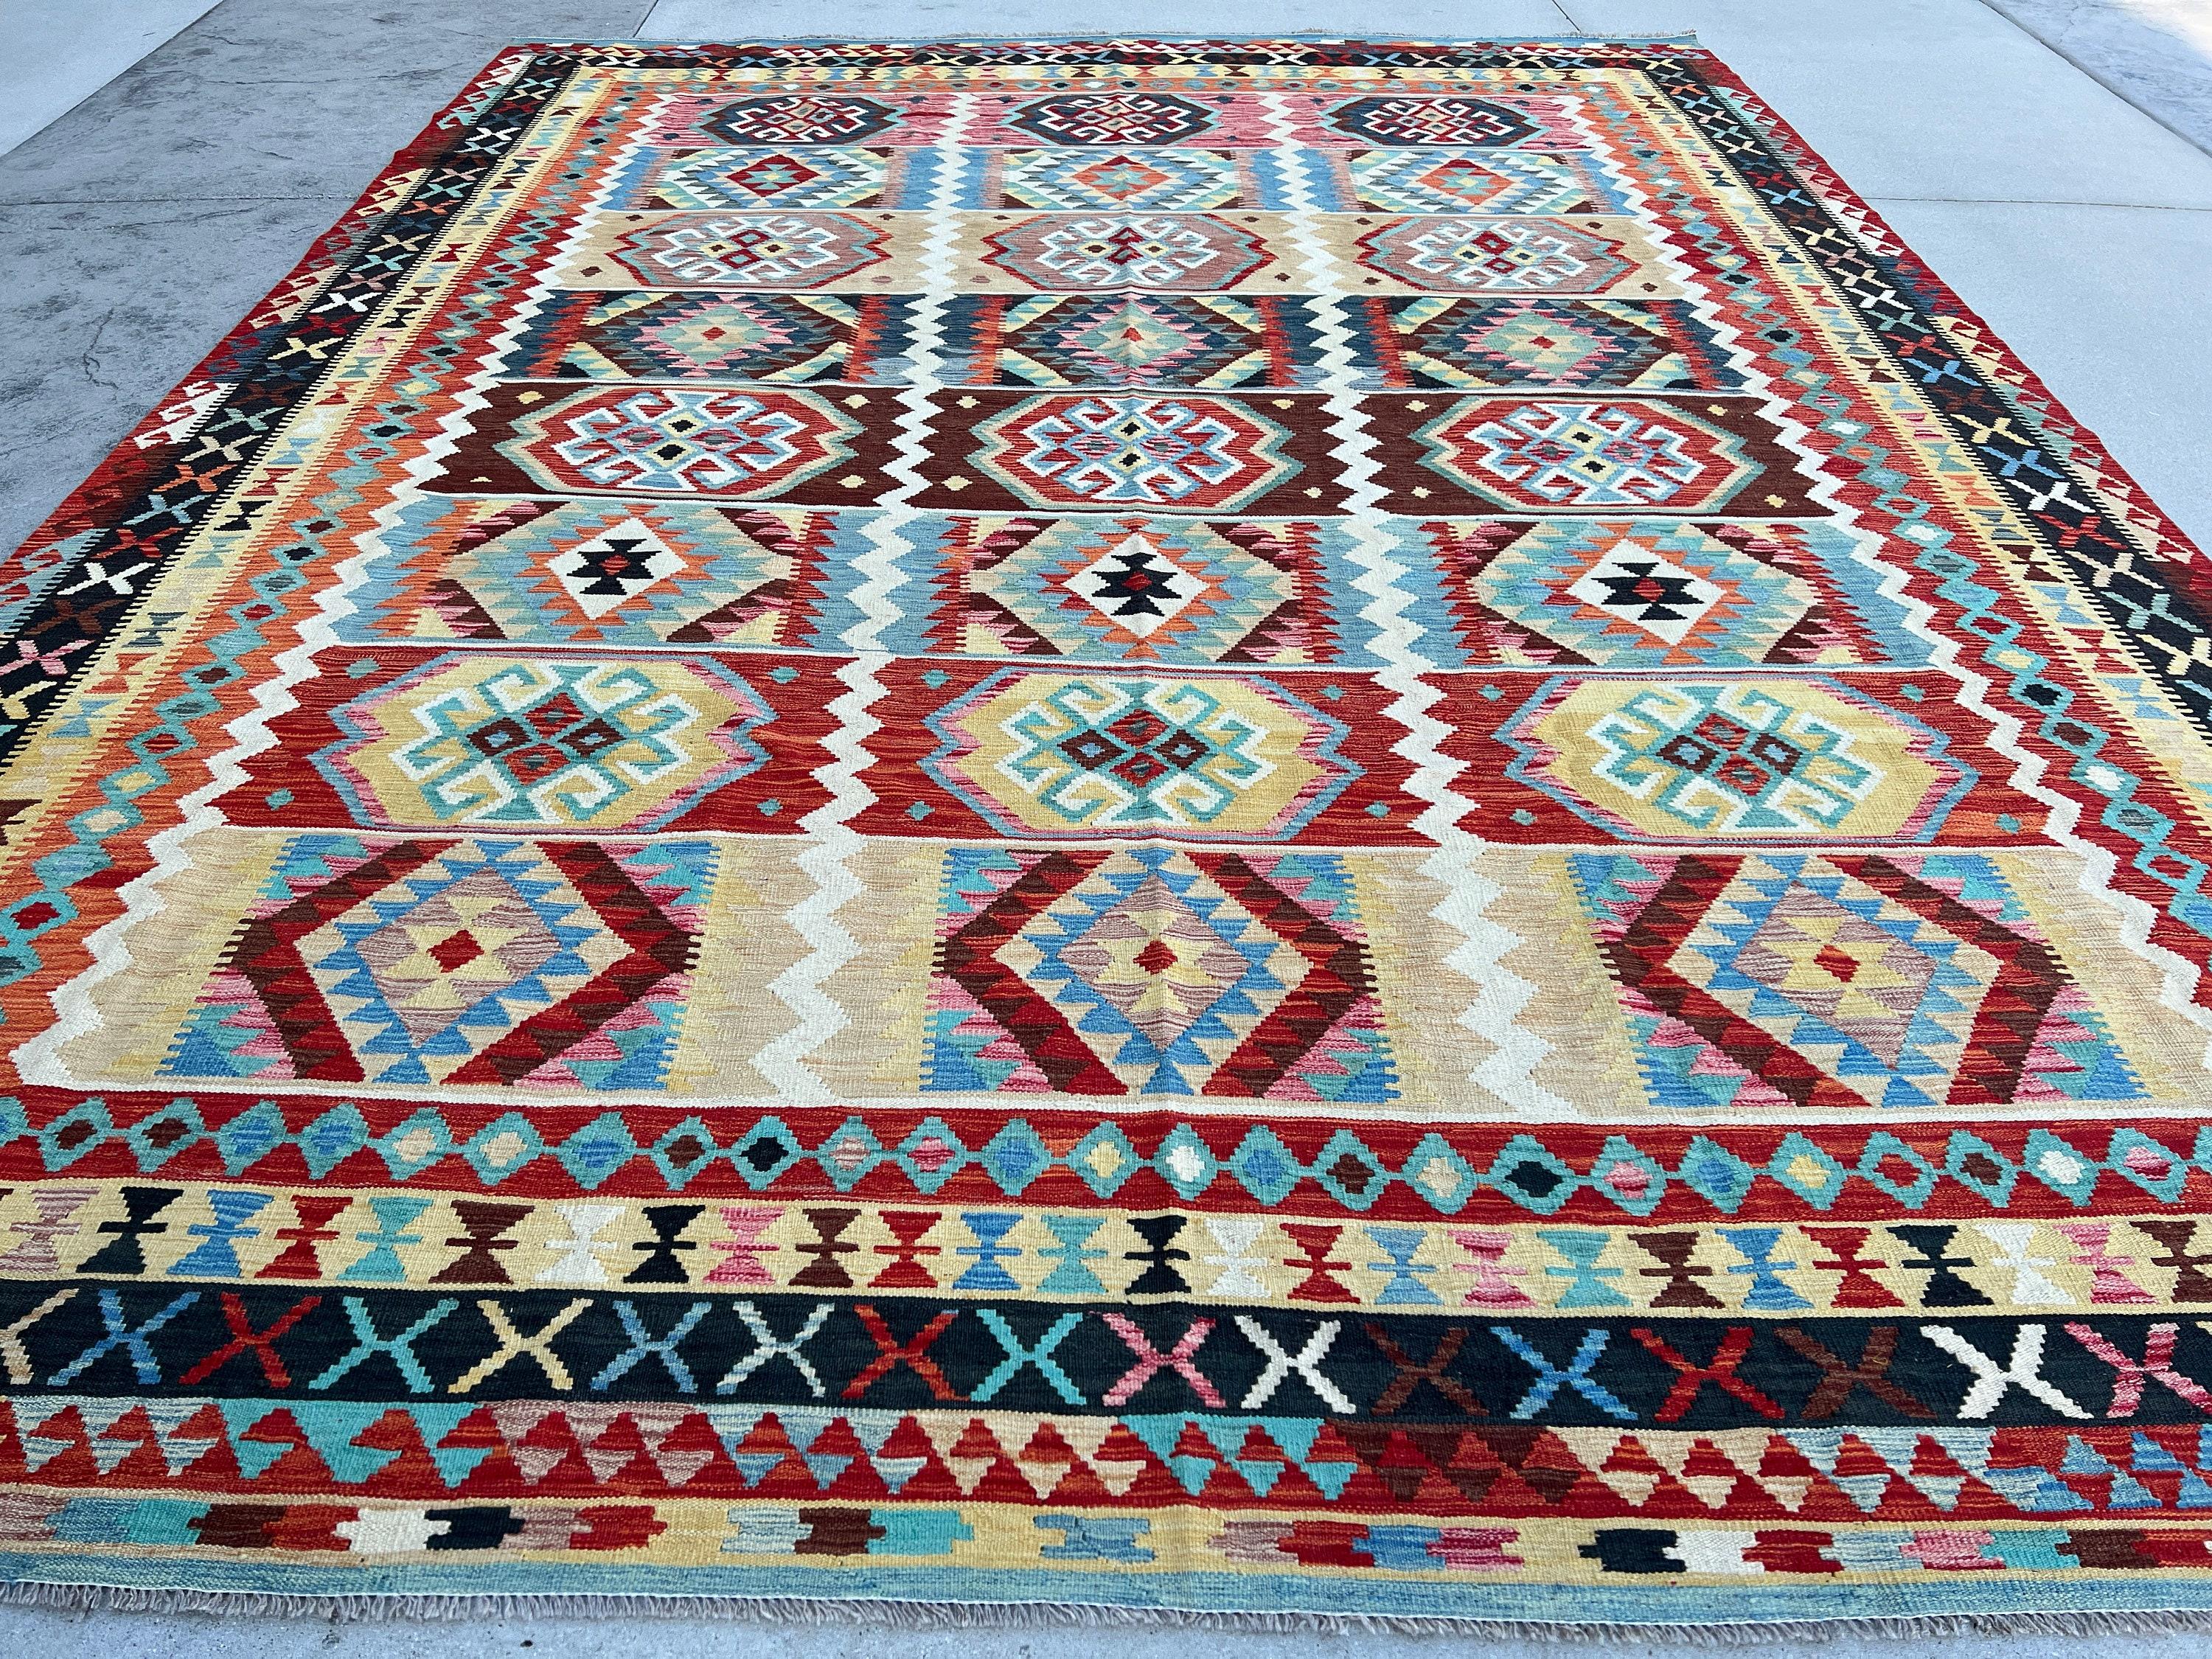 This rug was made with 100% premium, Afghan-sourced Ghazni wool.  The rich colors are dipped in natural dyes to create an heirloom finish that does not bleed and is meant to last for generations. Sourced through fair trade and sustainable means.